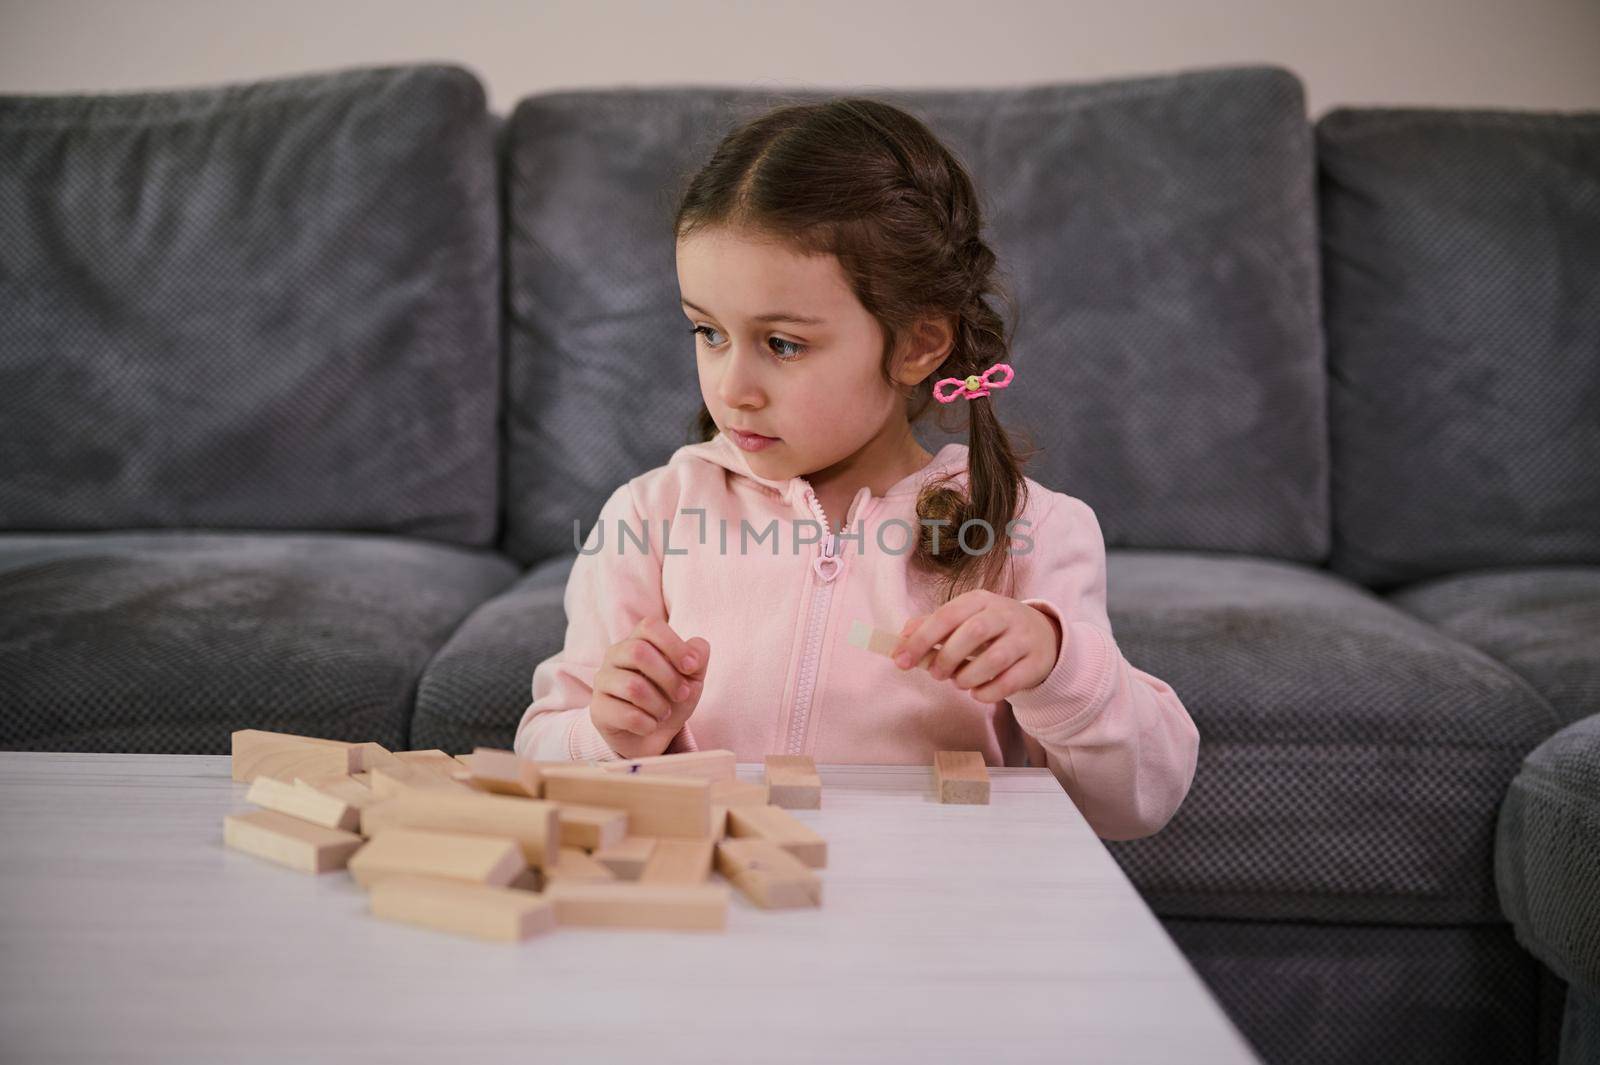 Education, development of fine motor skills, developmental board games concept. Adorable European girl concentrated on building with wooden blocks, sitting at a table in the living room by artgf